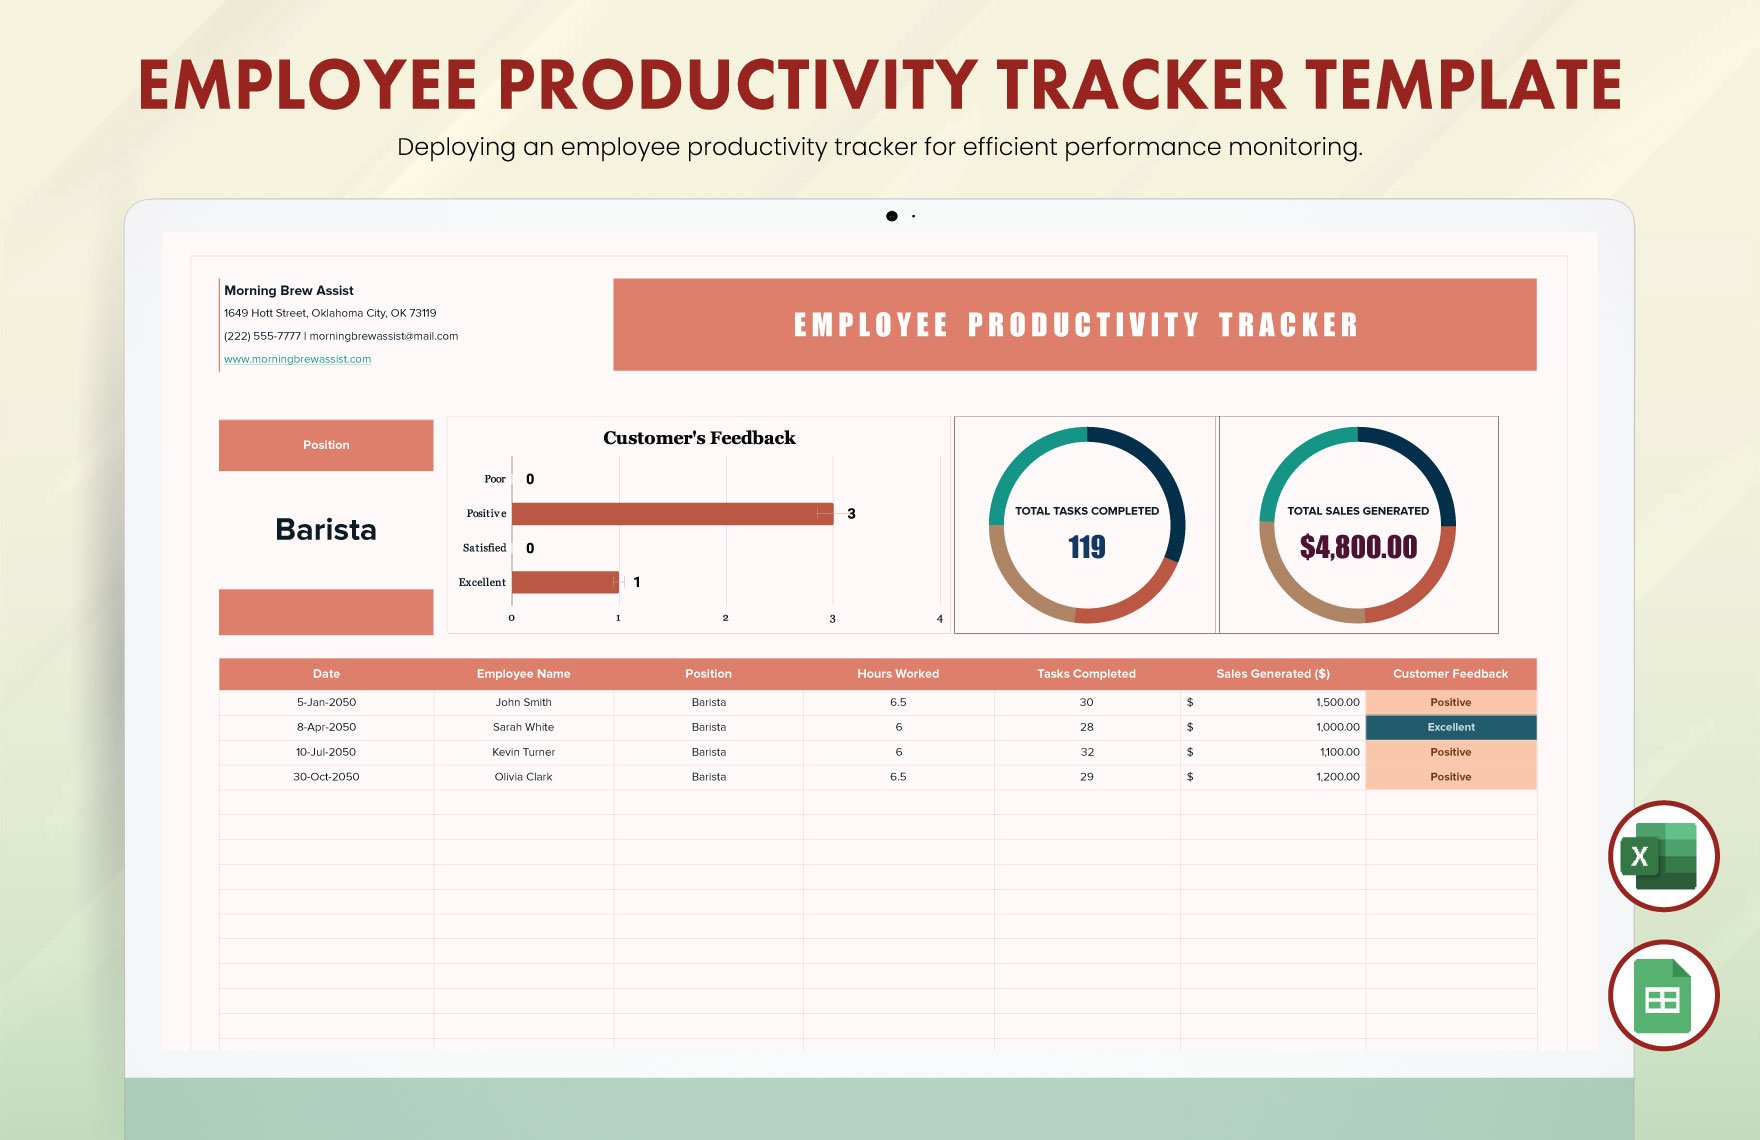 Employee Productivity Tracker Template in Excel, Google Sheets